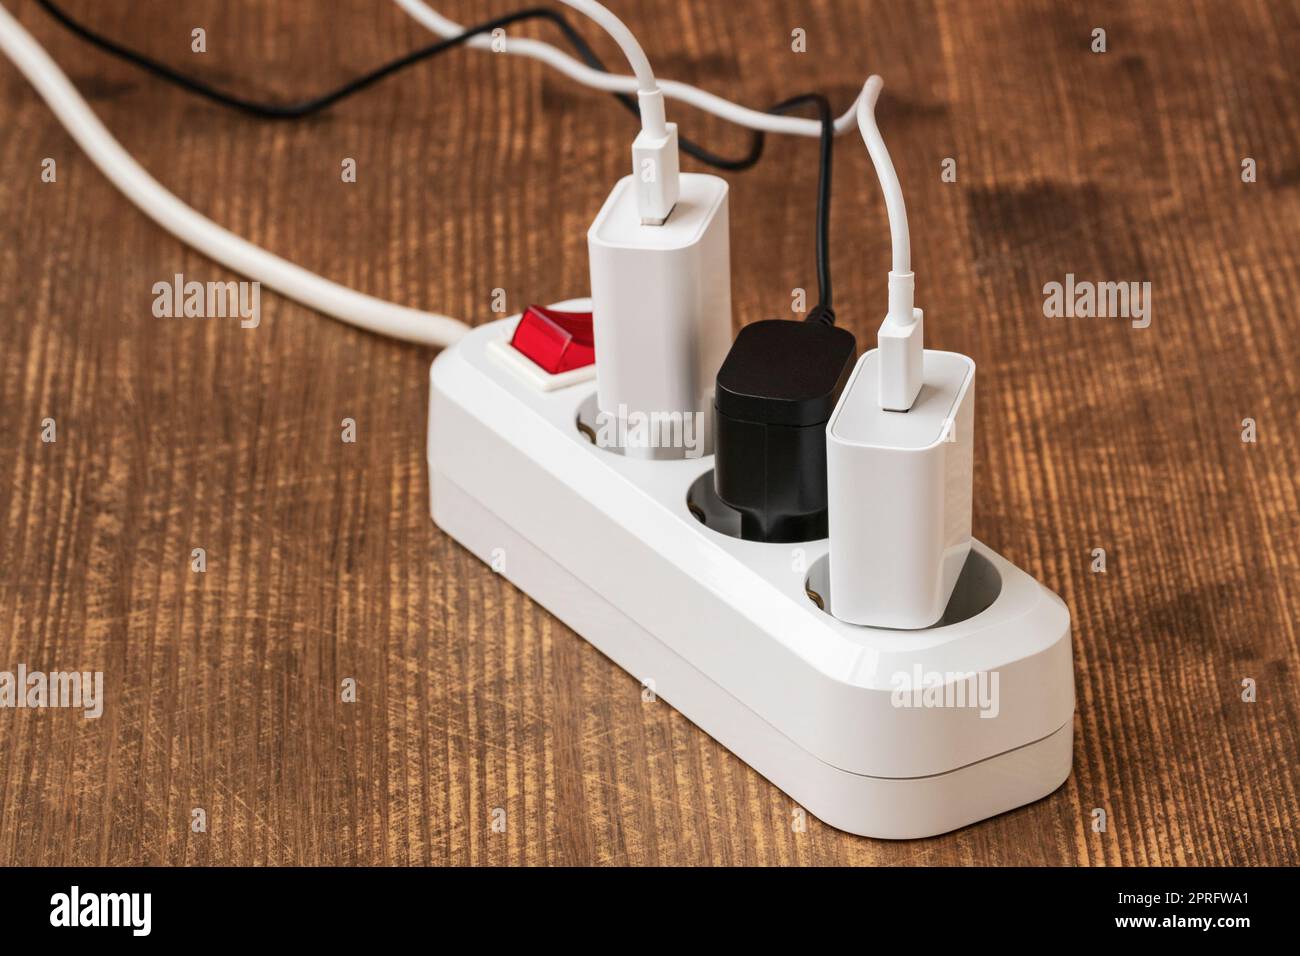 Electrical plugs with cords connected to electrical power strip Stock Photo